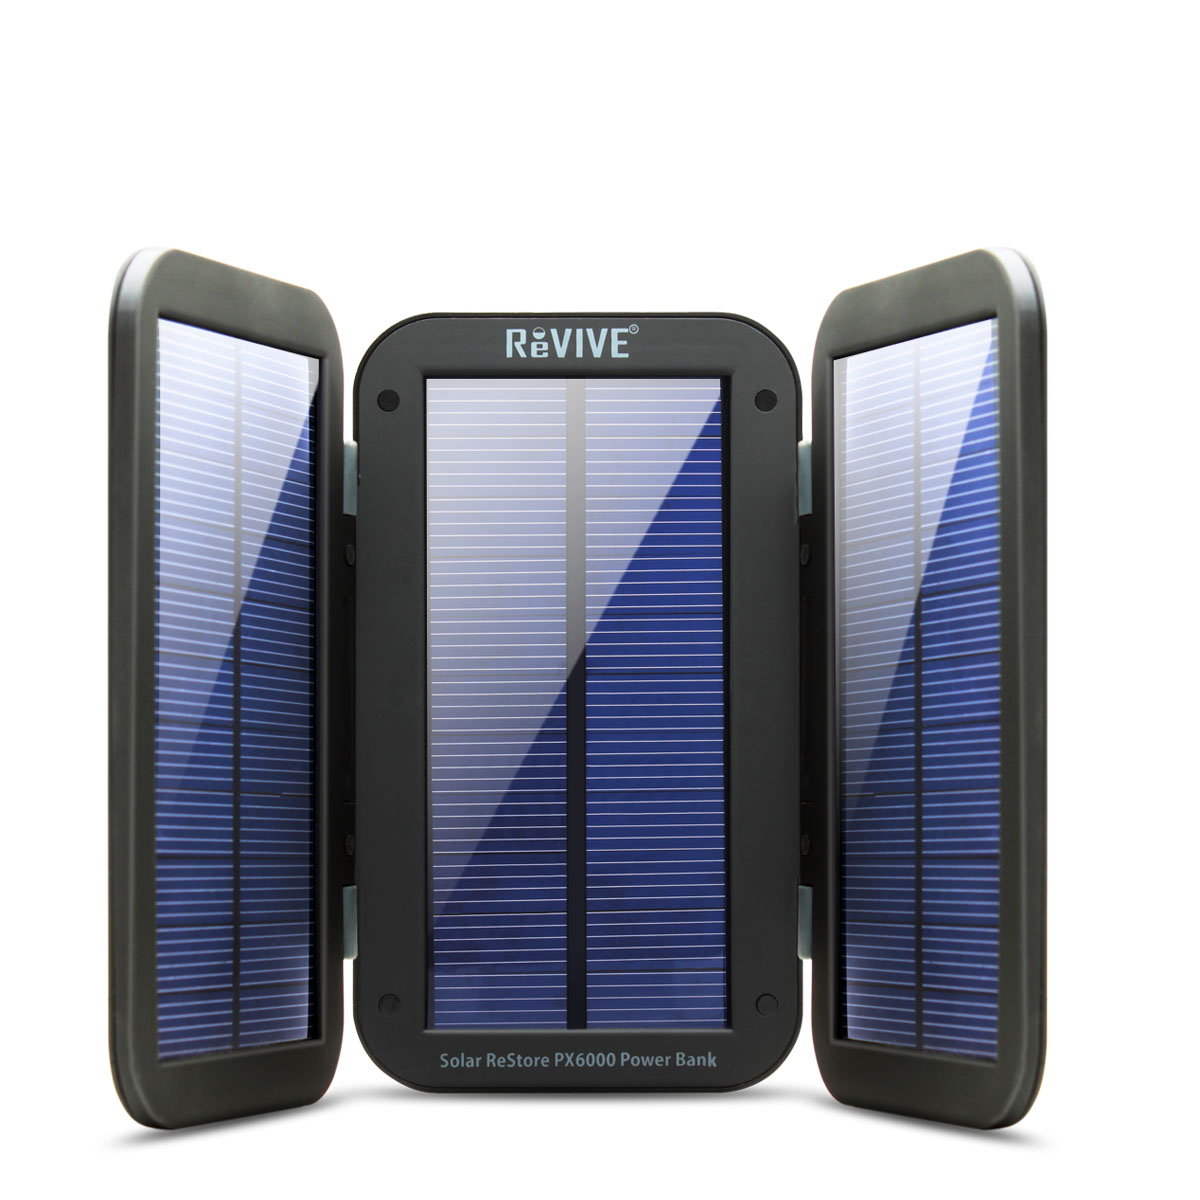 ReVIVE Solar ReStore PX6000 Power Bank Charger &amp; USB ...